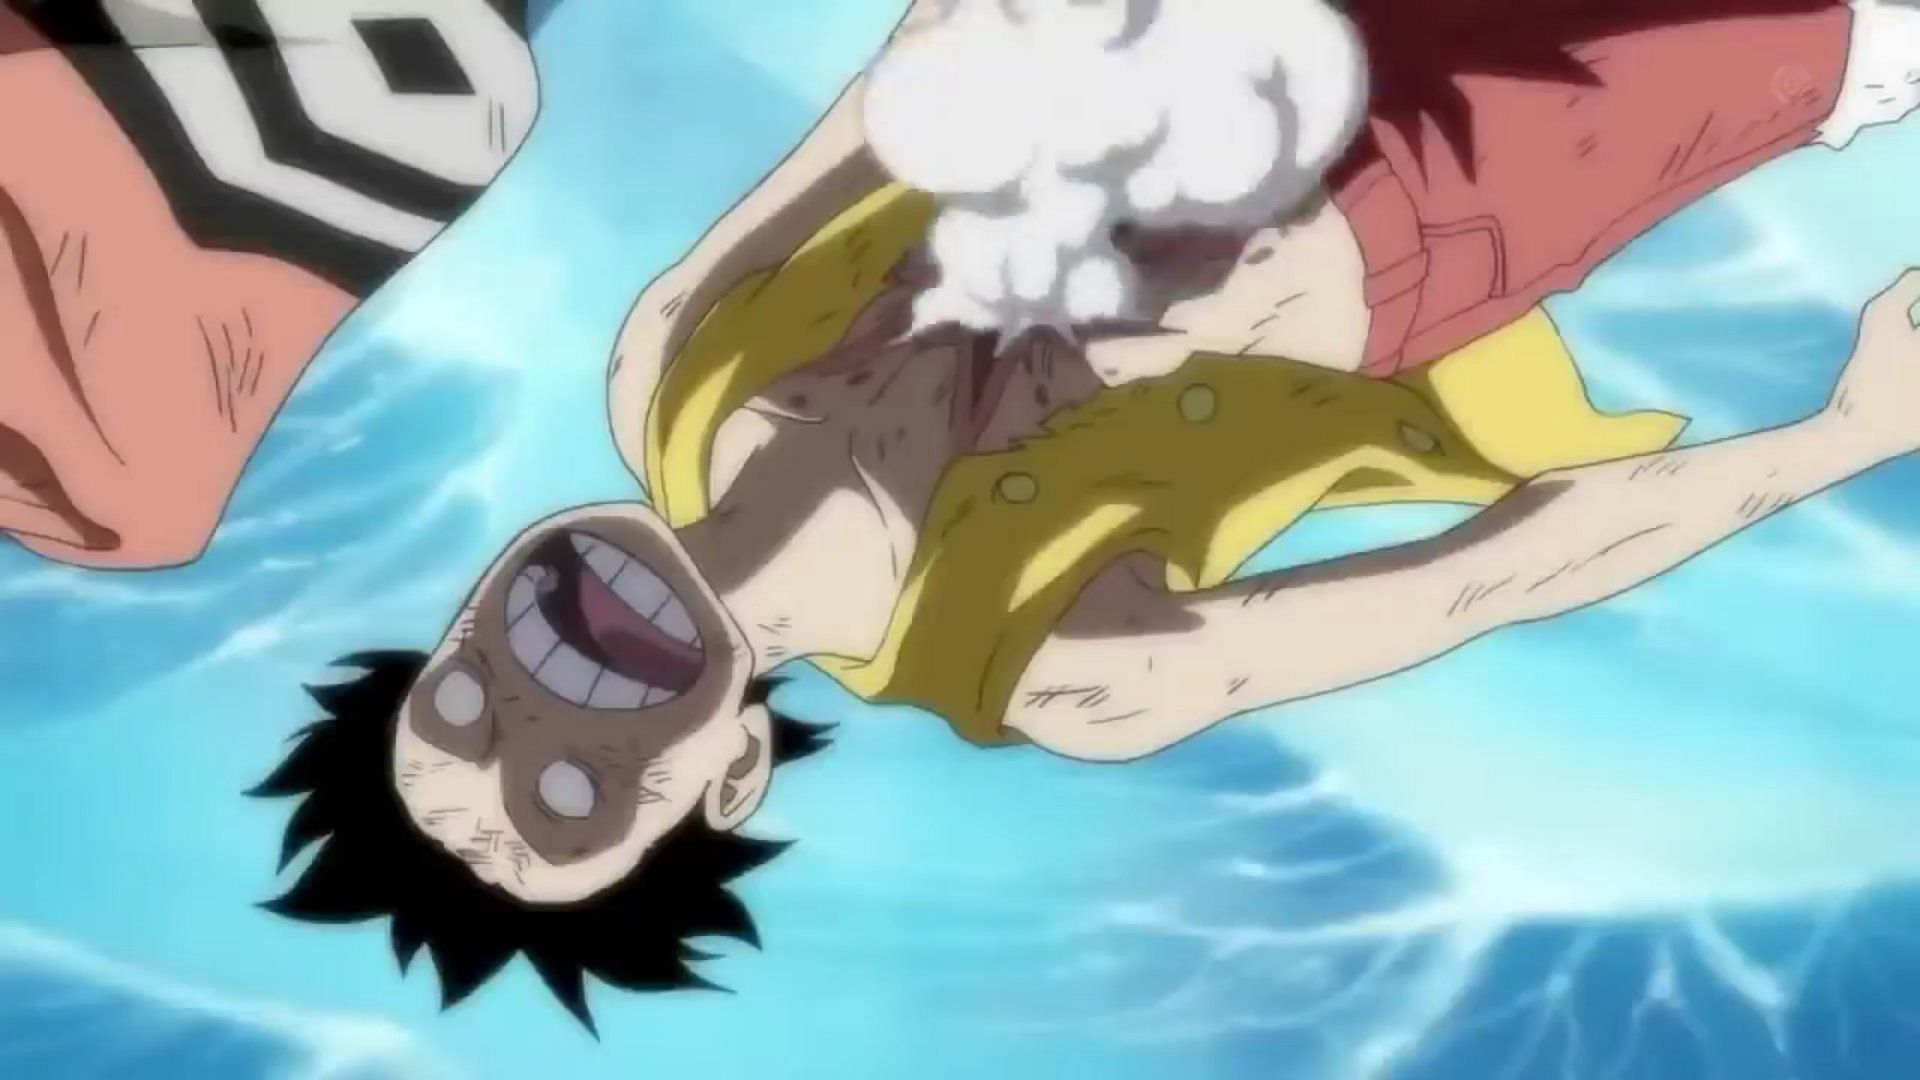 Luffy after getting hit by Akainu's magma fist (Image via Toei Animation)